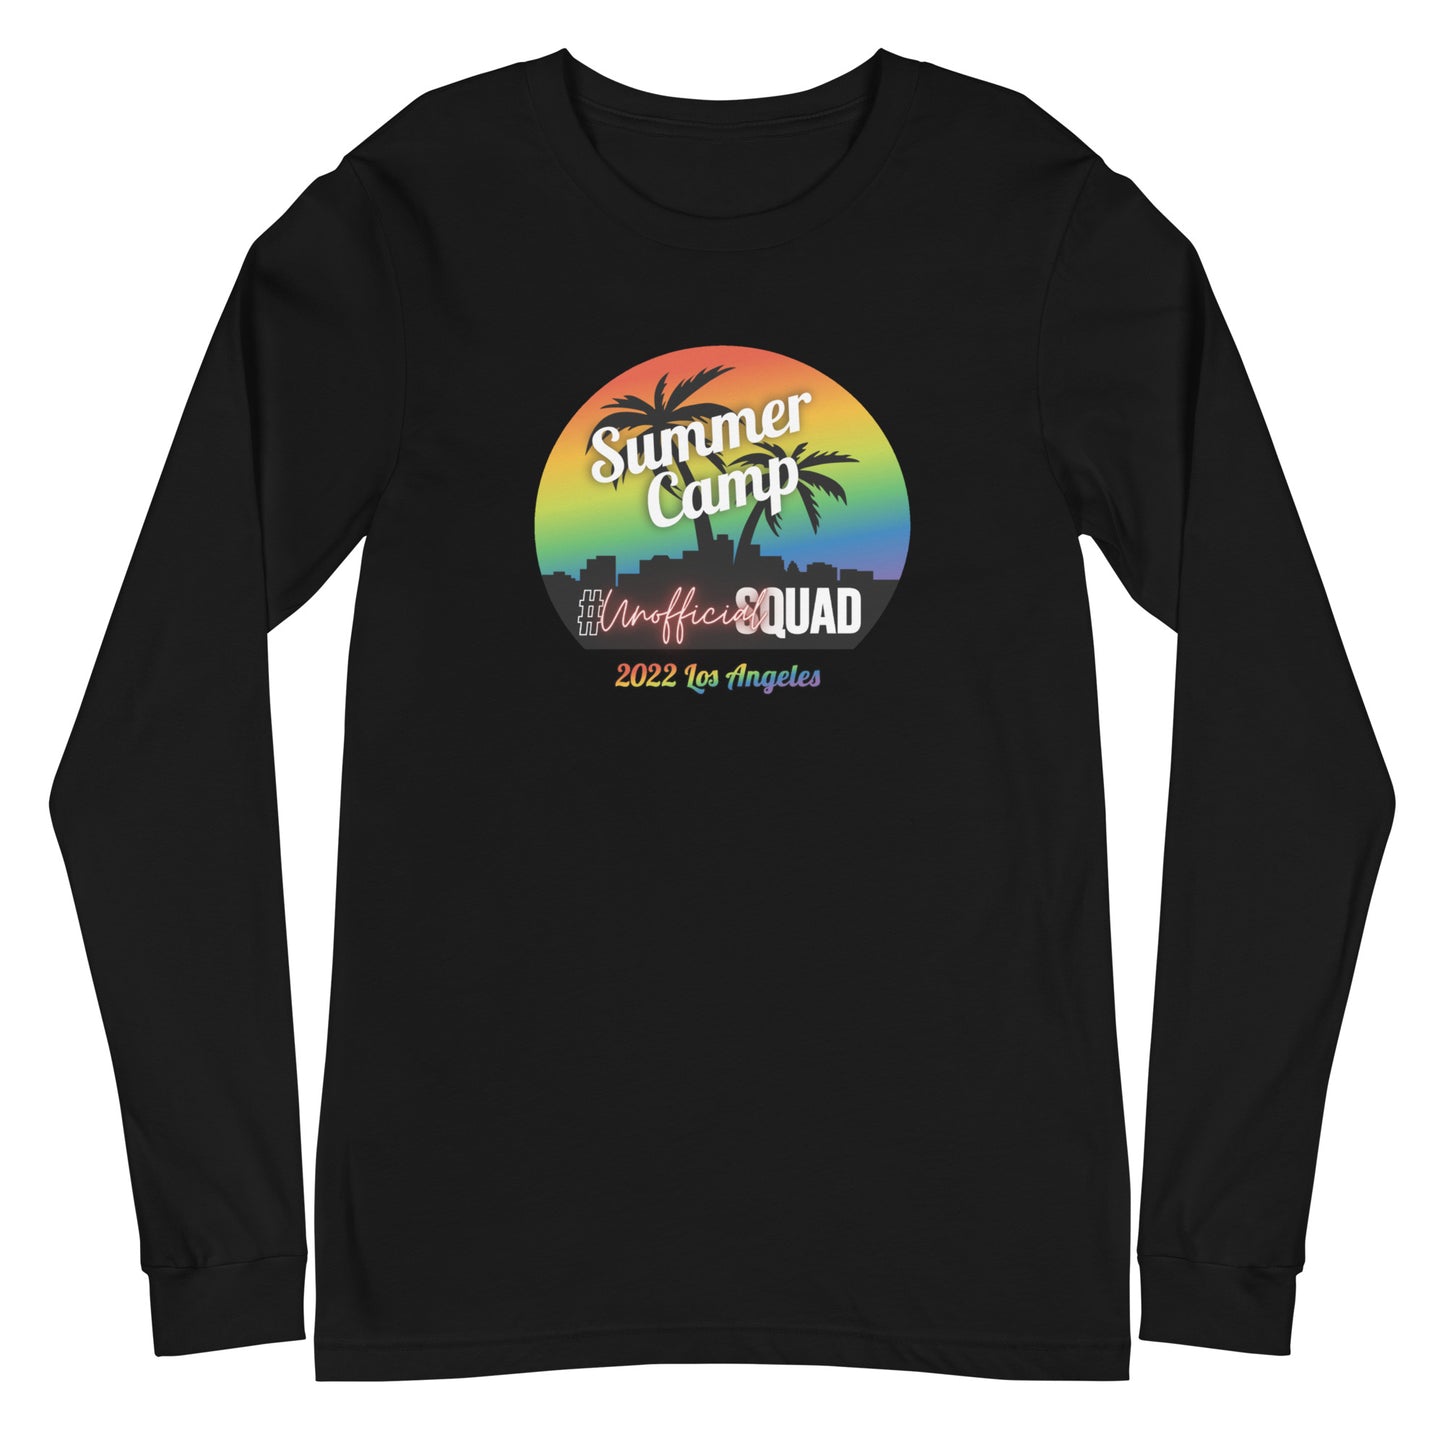 Unofficial Squad Summer Camp 2022 - Unisex Long Sleeve Tee